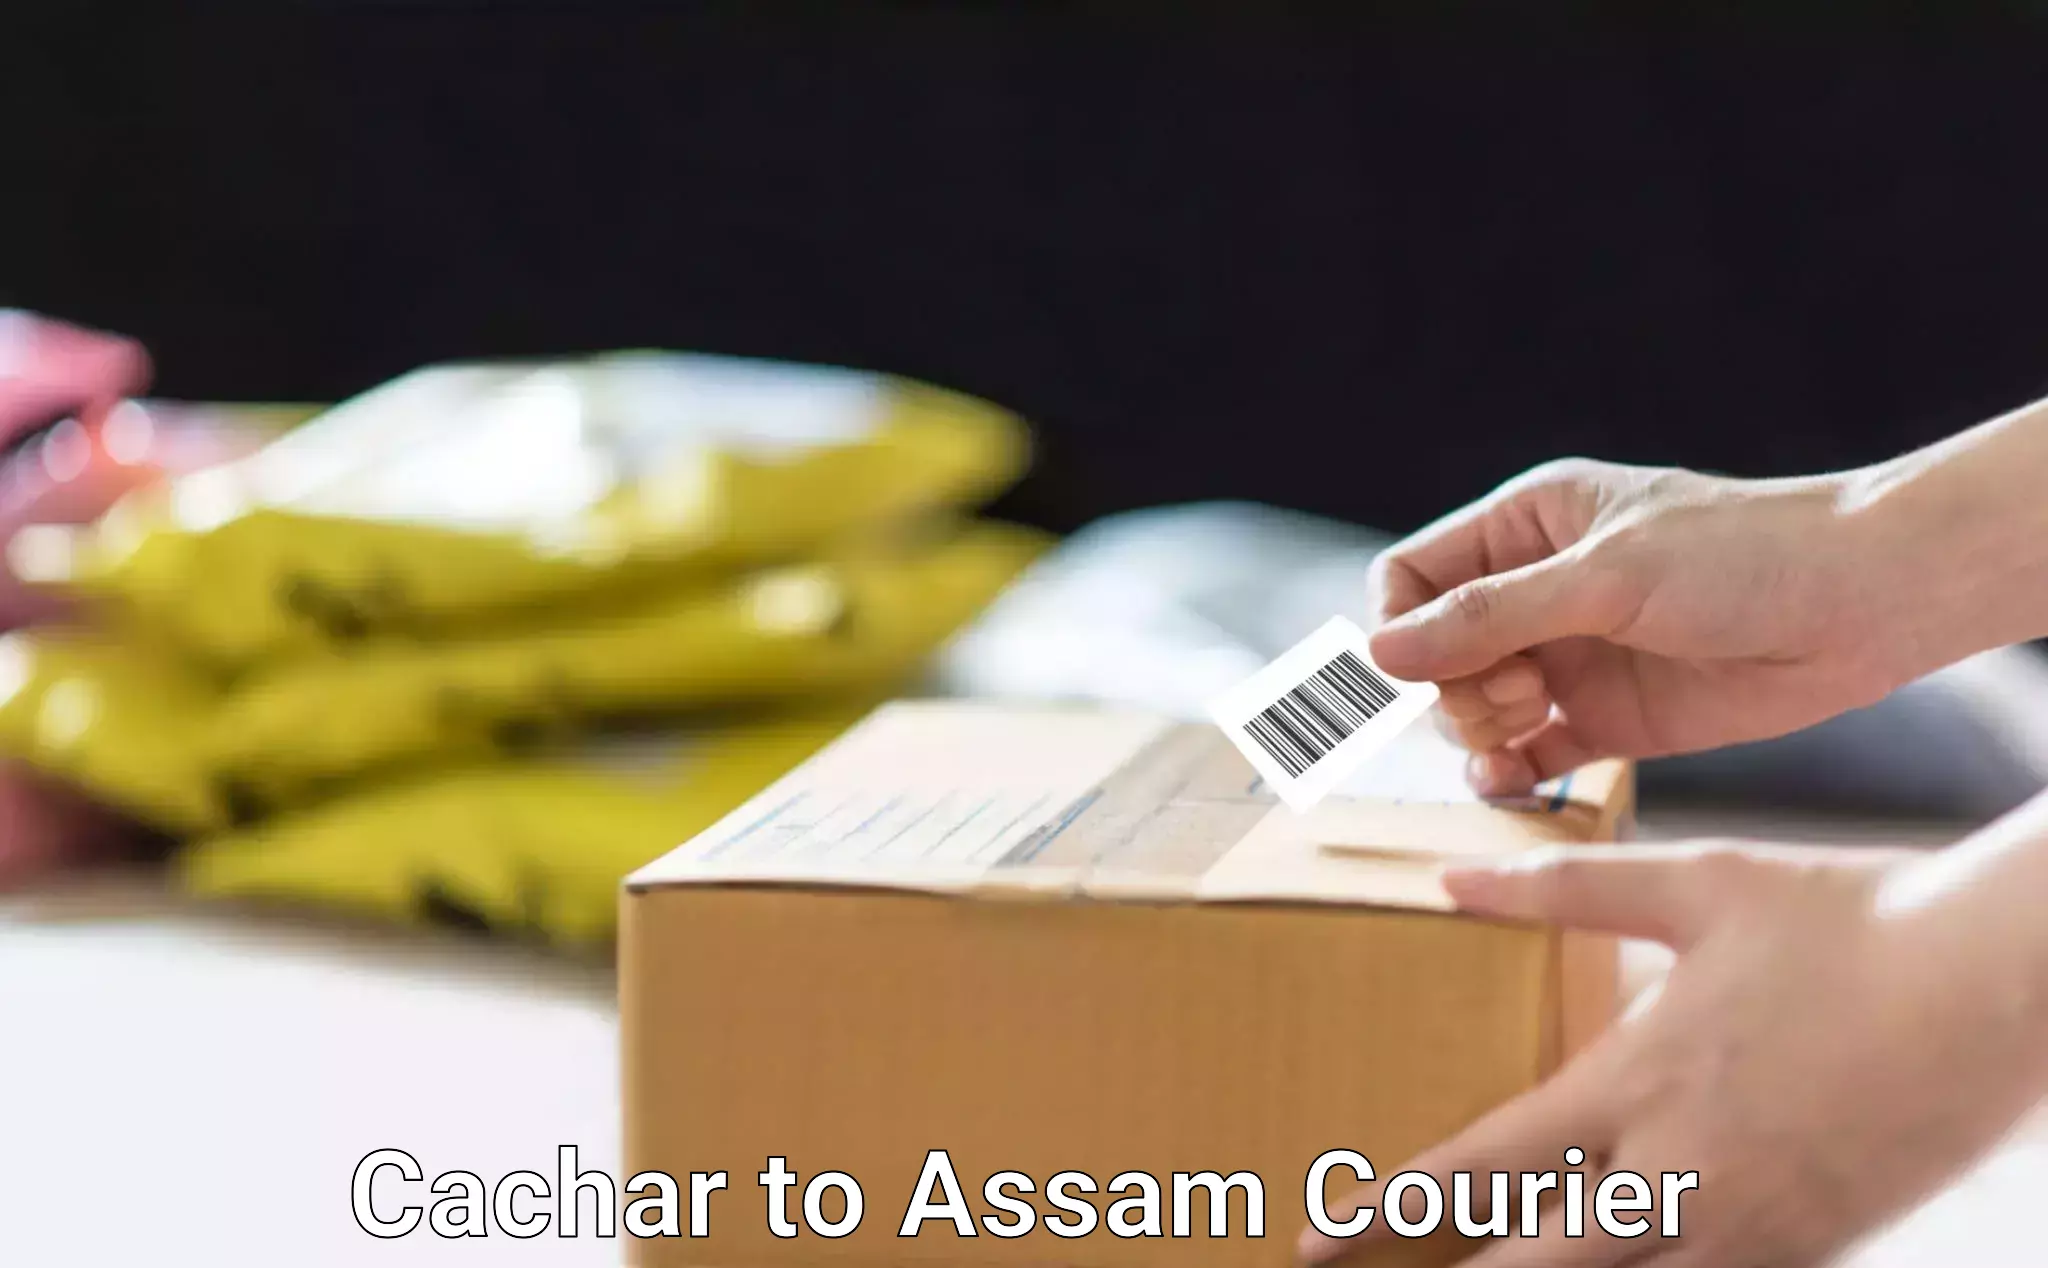 Online courier booking Cachar to Hojai